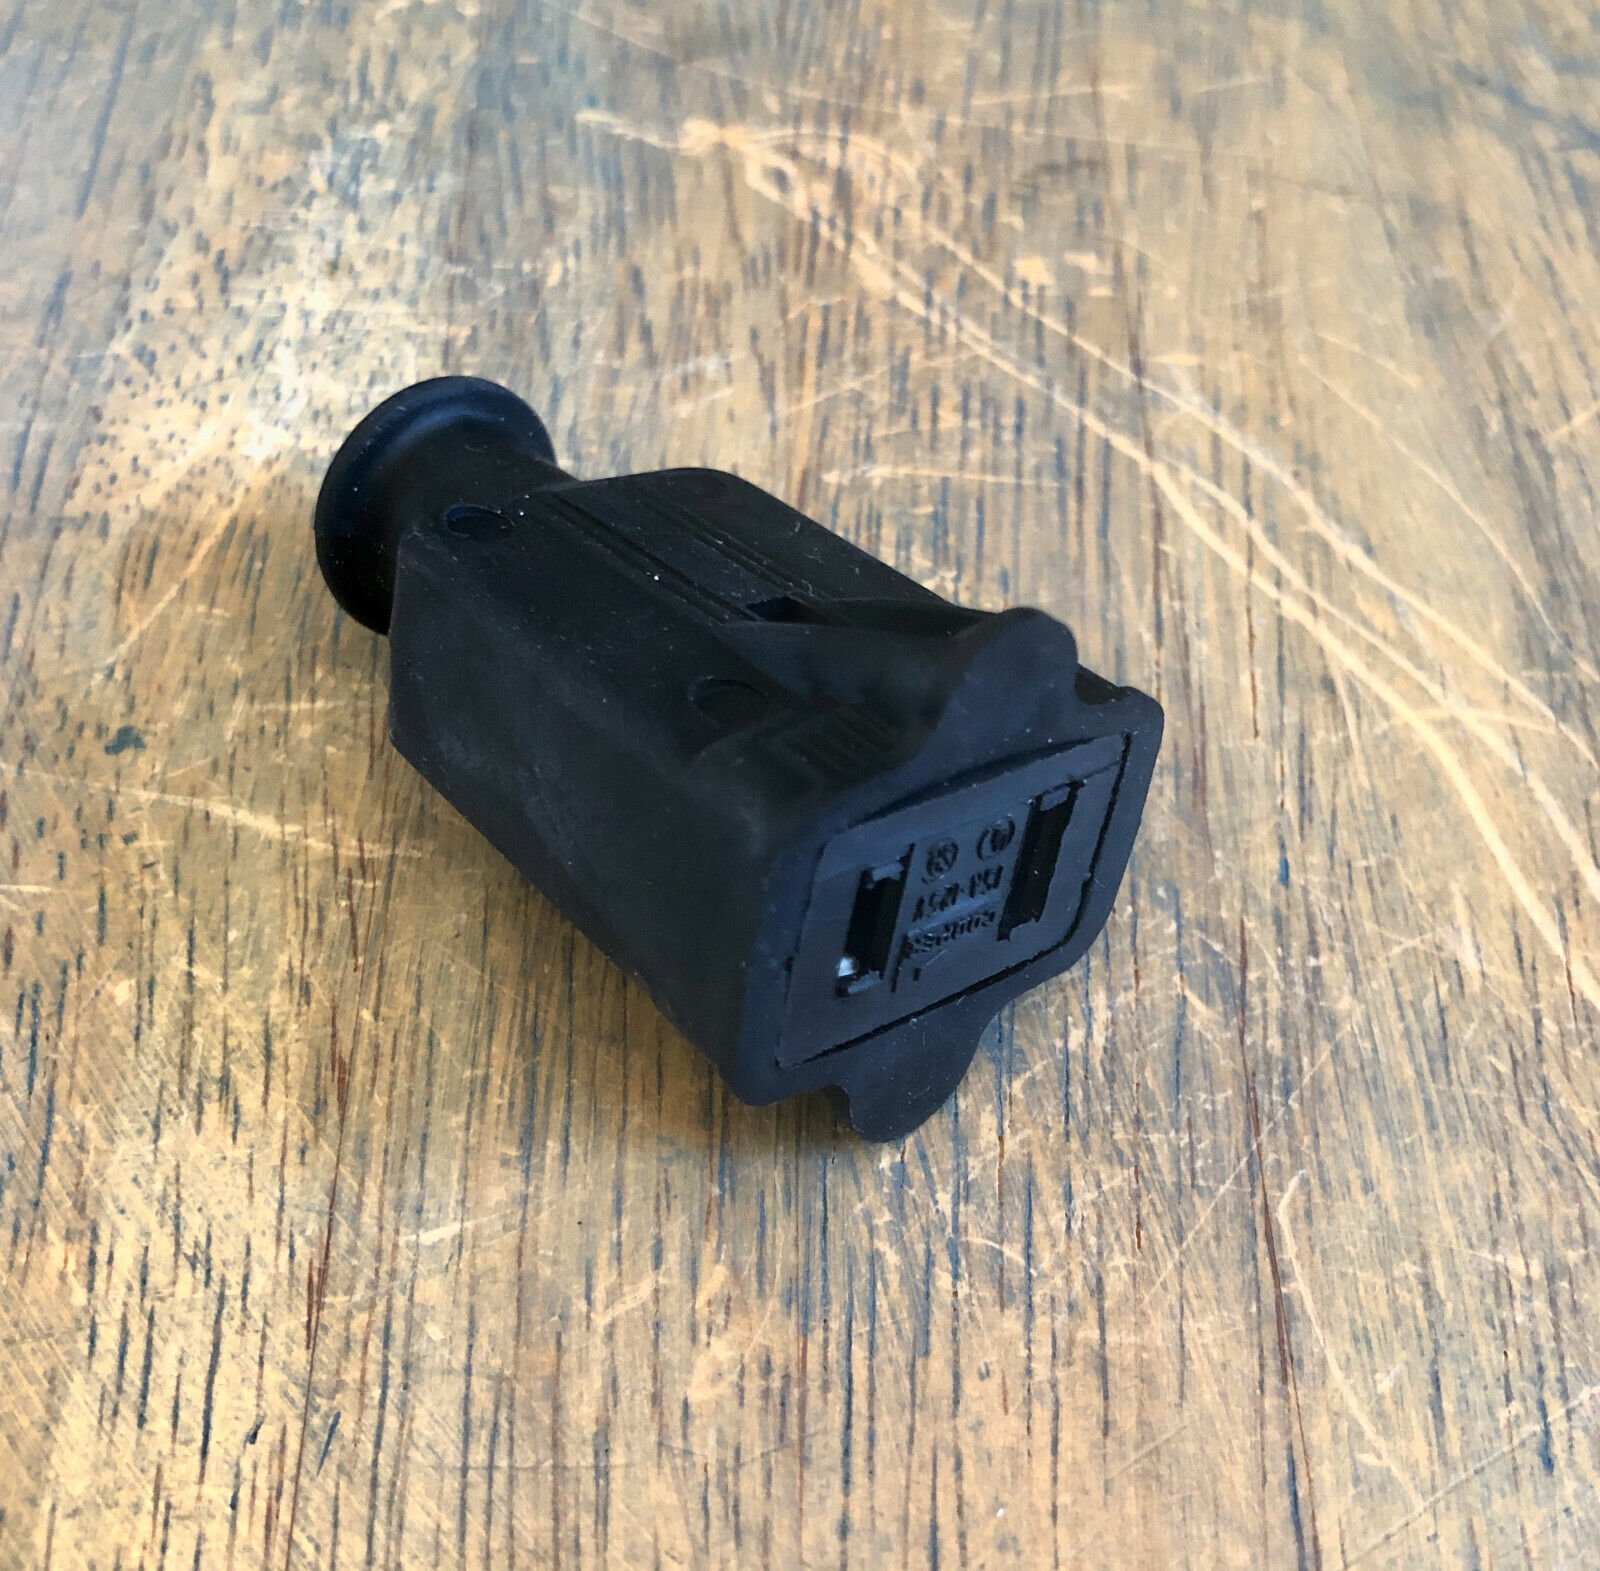 2 Prong Female Electrical Outlet - Black, polarized cord receptacle connector